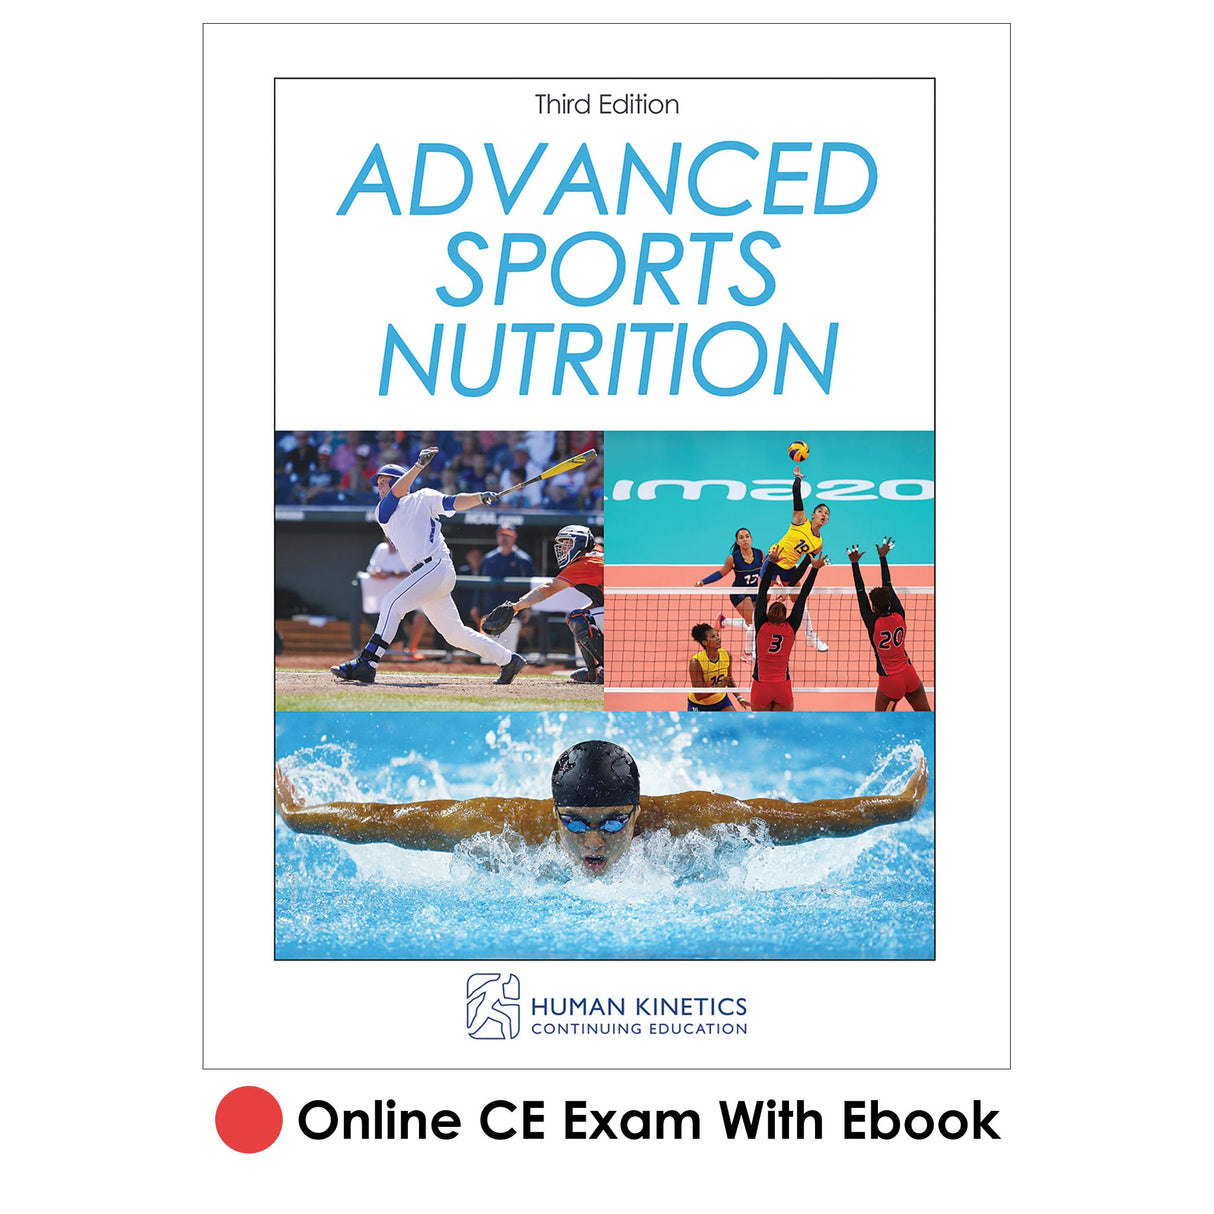 Advanced Sports Nutrition 3rd Edition Online CE Exam With Ebook